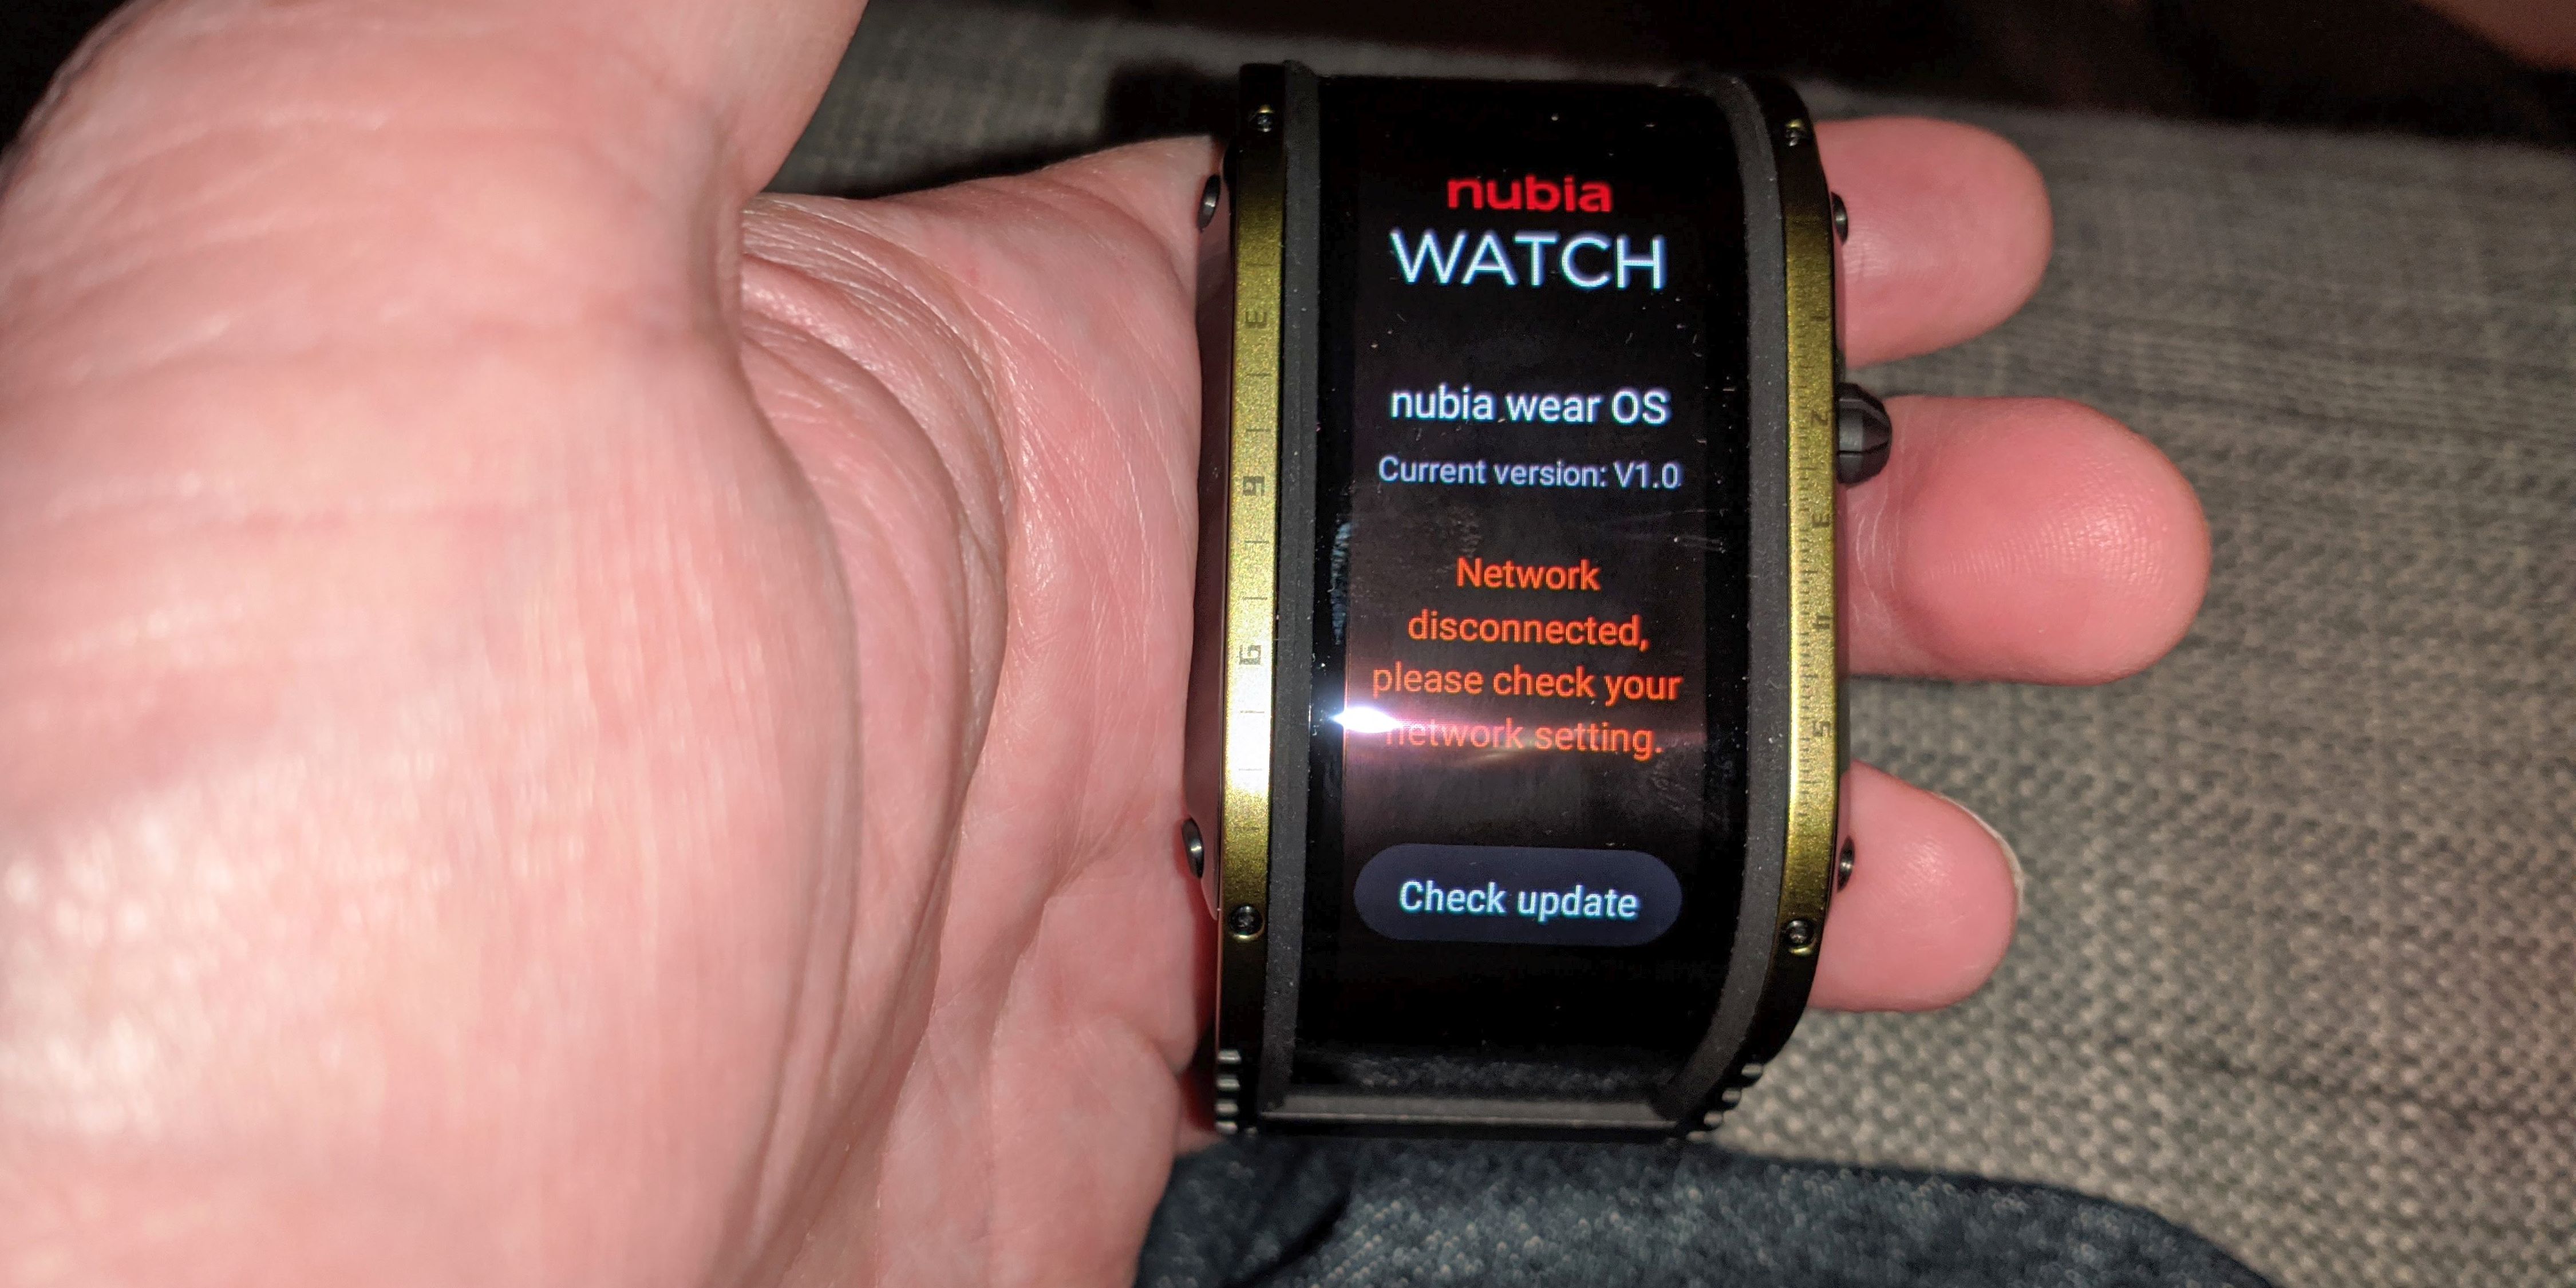 nubia-watch-network-disconnected.jpg